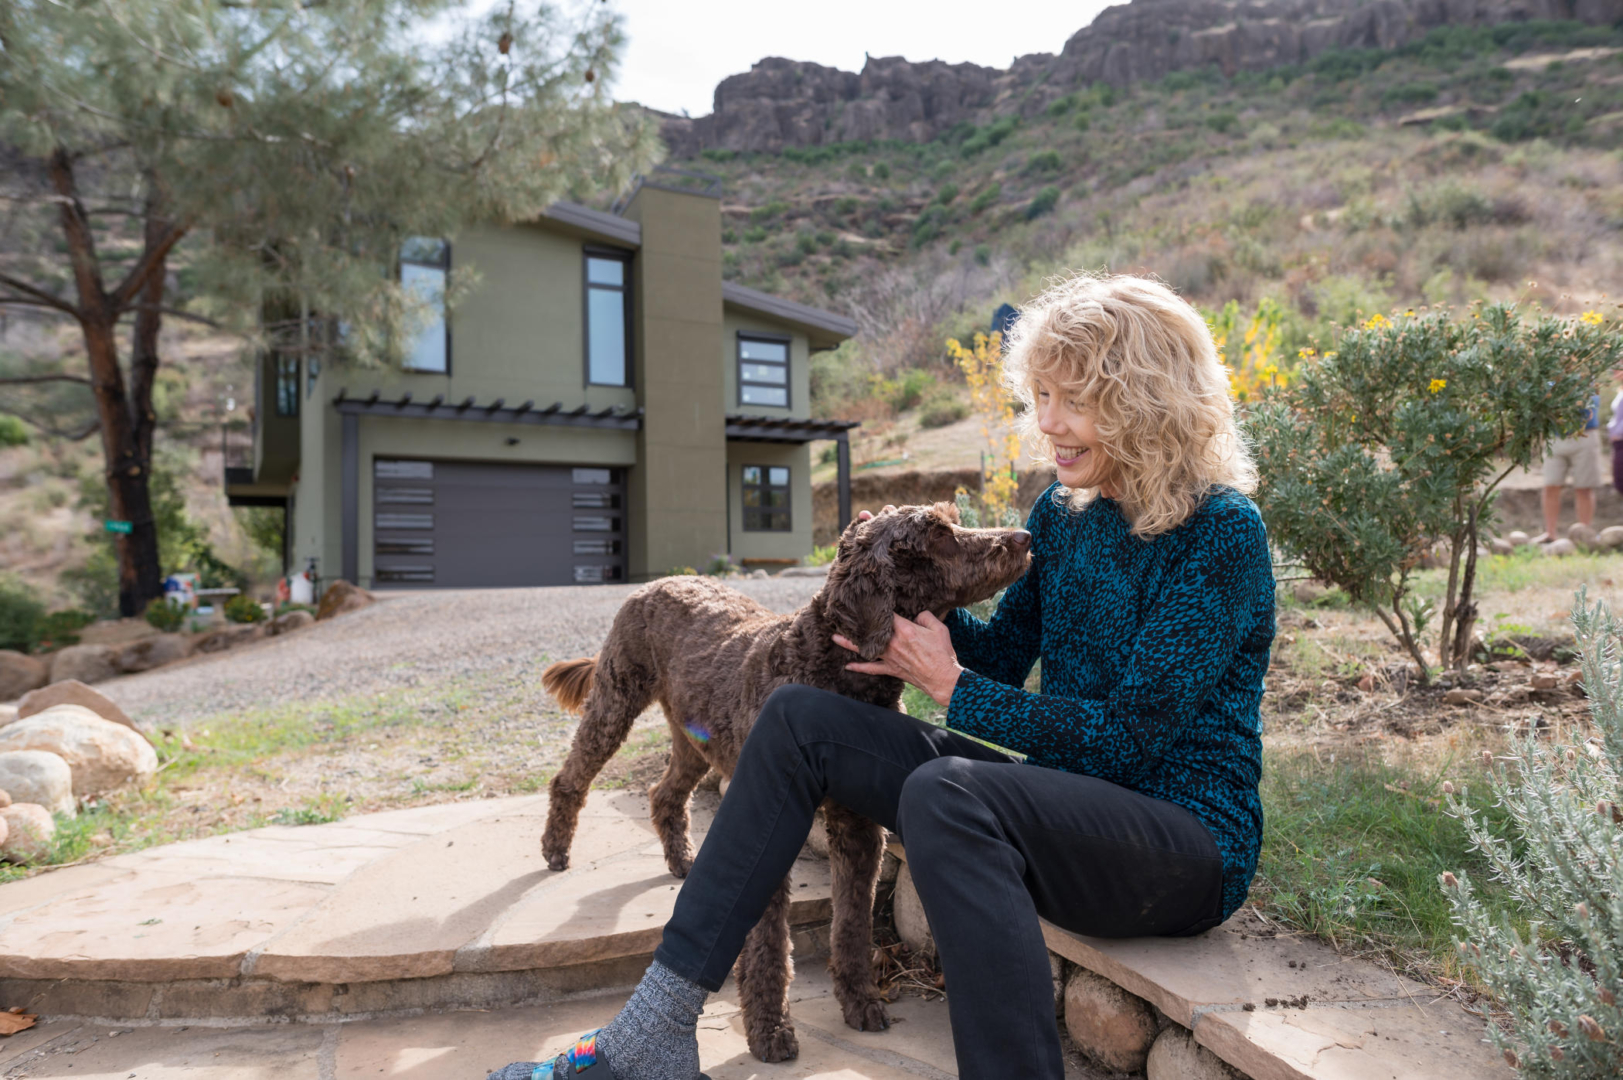 Cindy Wolff smiles as she rubs her hands along her dog's ears and throat as they sit on a walkway outside their new home.